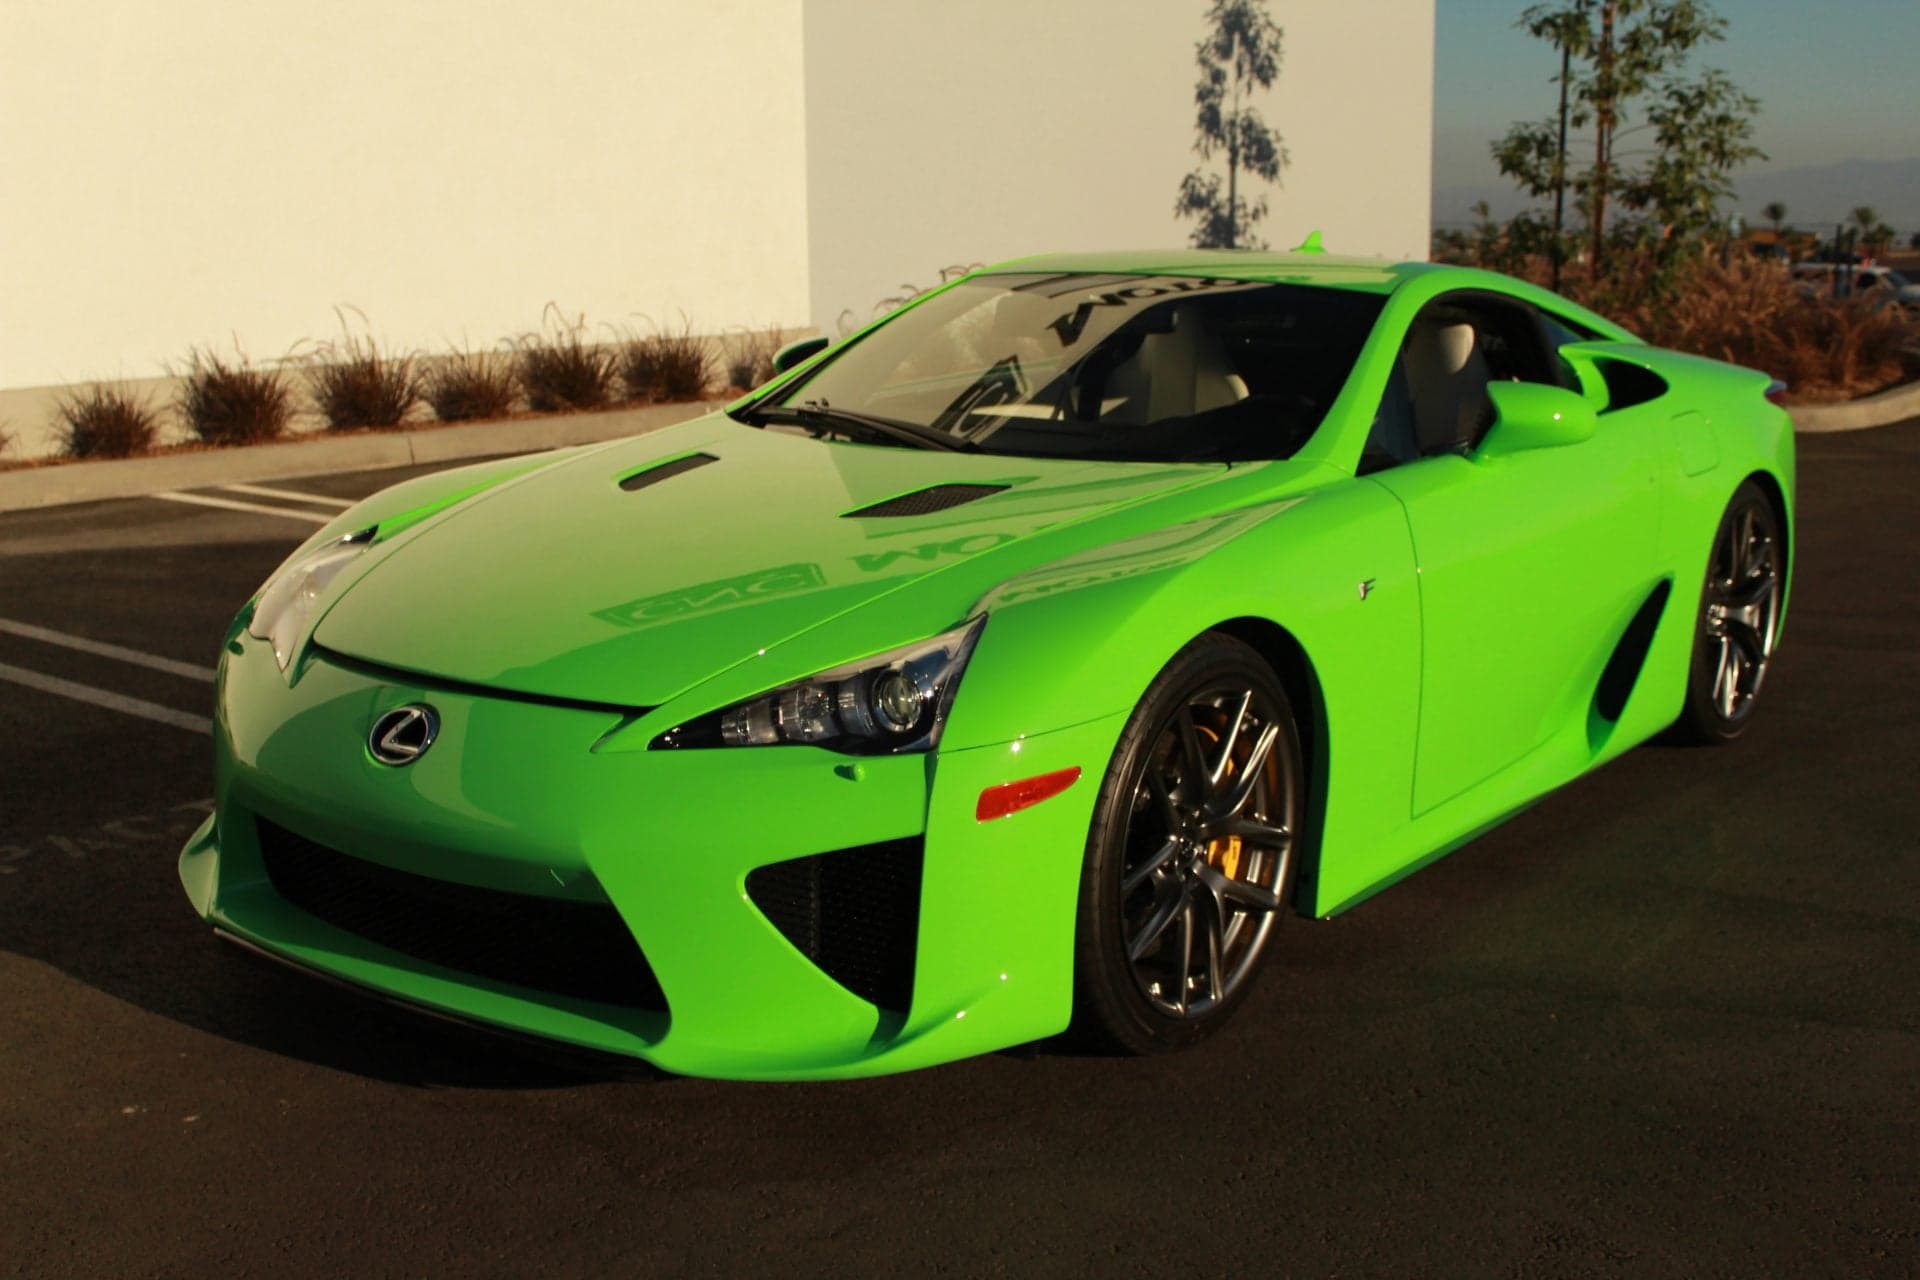 Get Through Wednesday by Watching the V-10 Lexus LFA Revving to 9,000 RPM